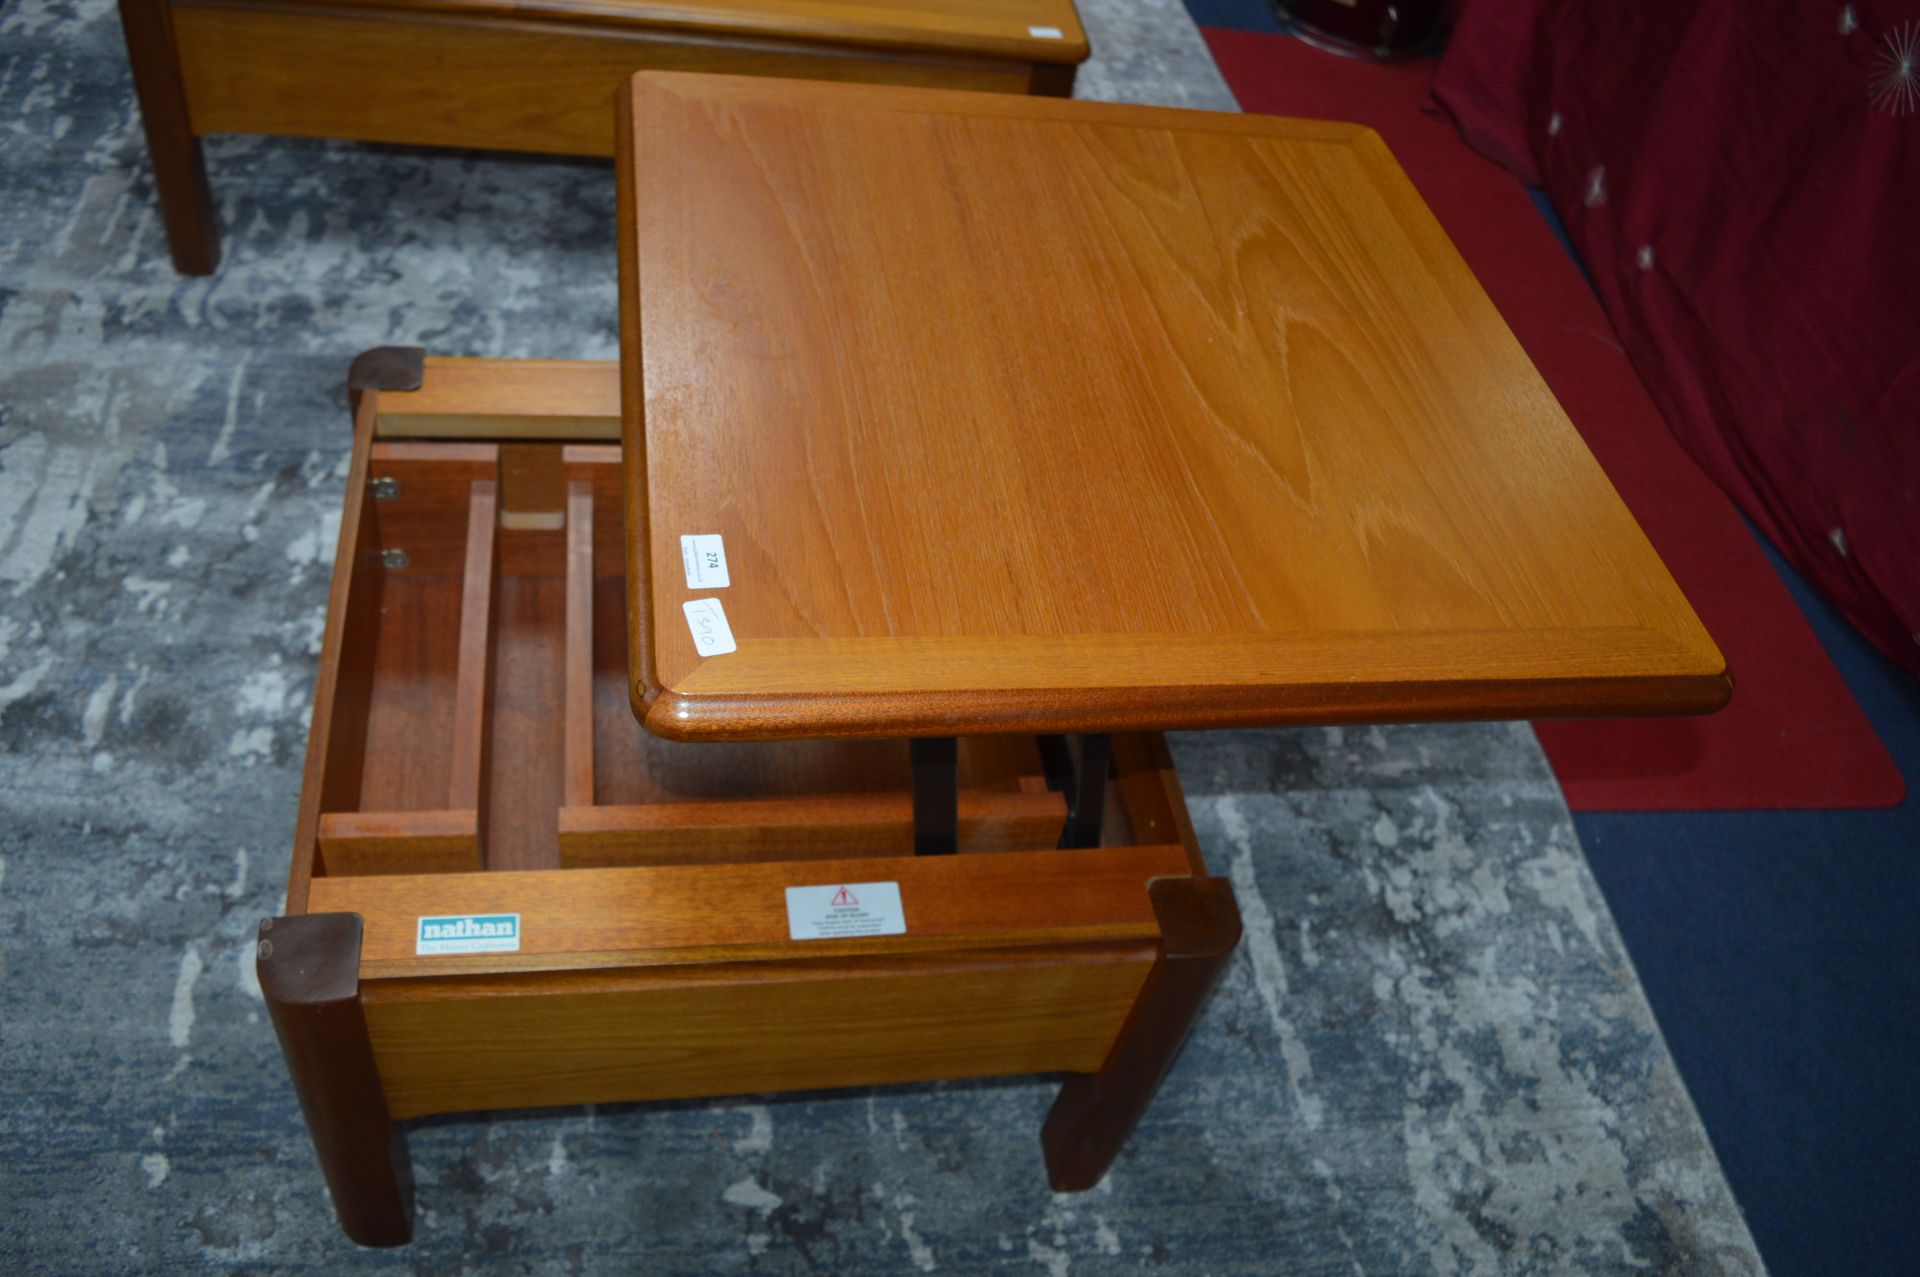 Nathan Oak & Teak Square Coffee Table with Interna - Image 2 of 2